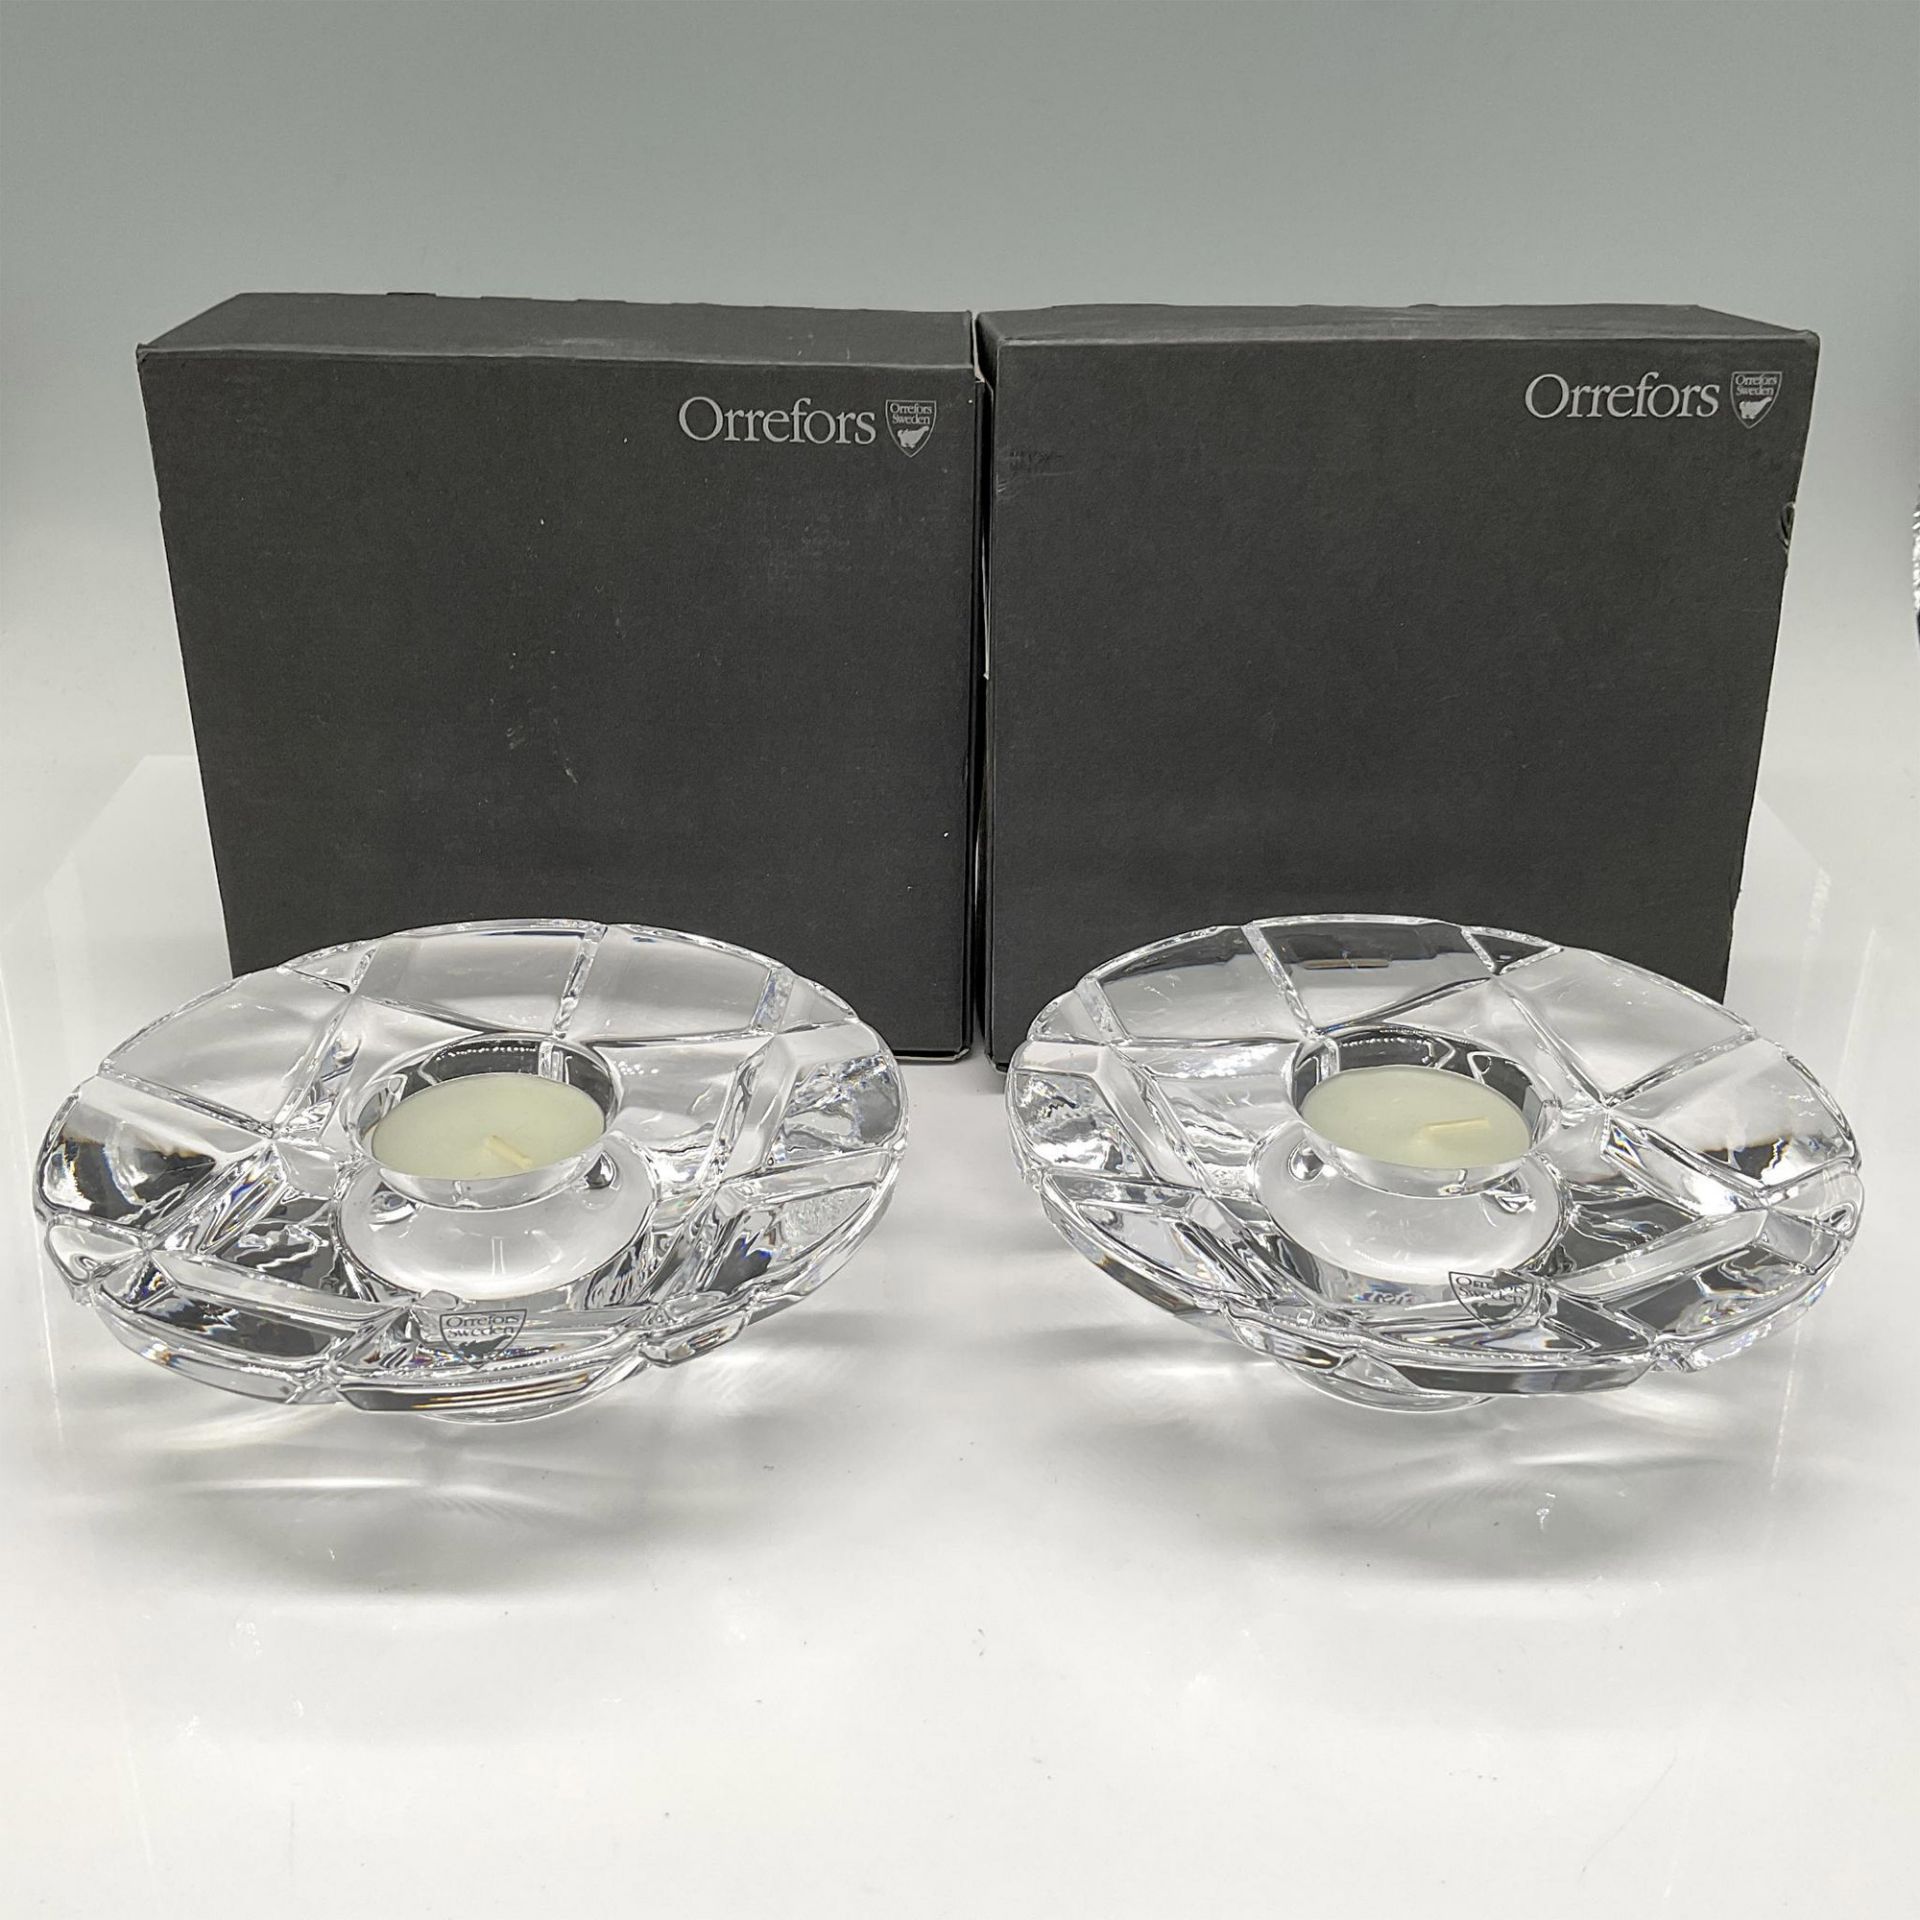 Pair of Orrefors Crystal Madison Votives - Image 4 of 4